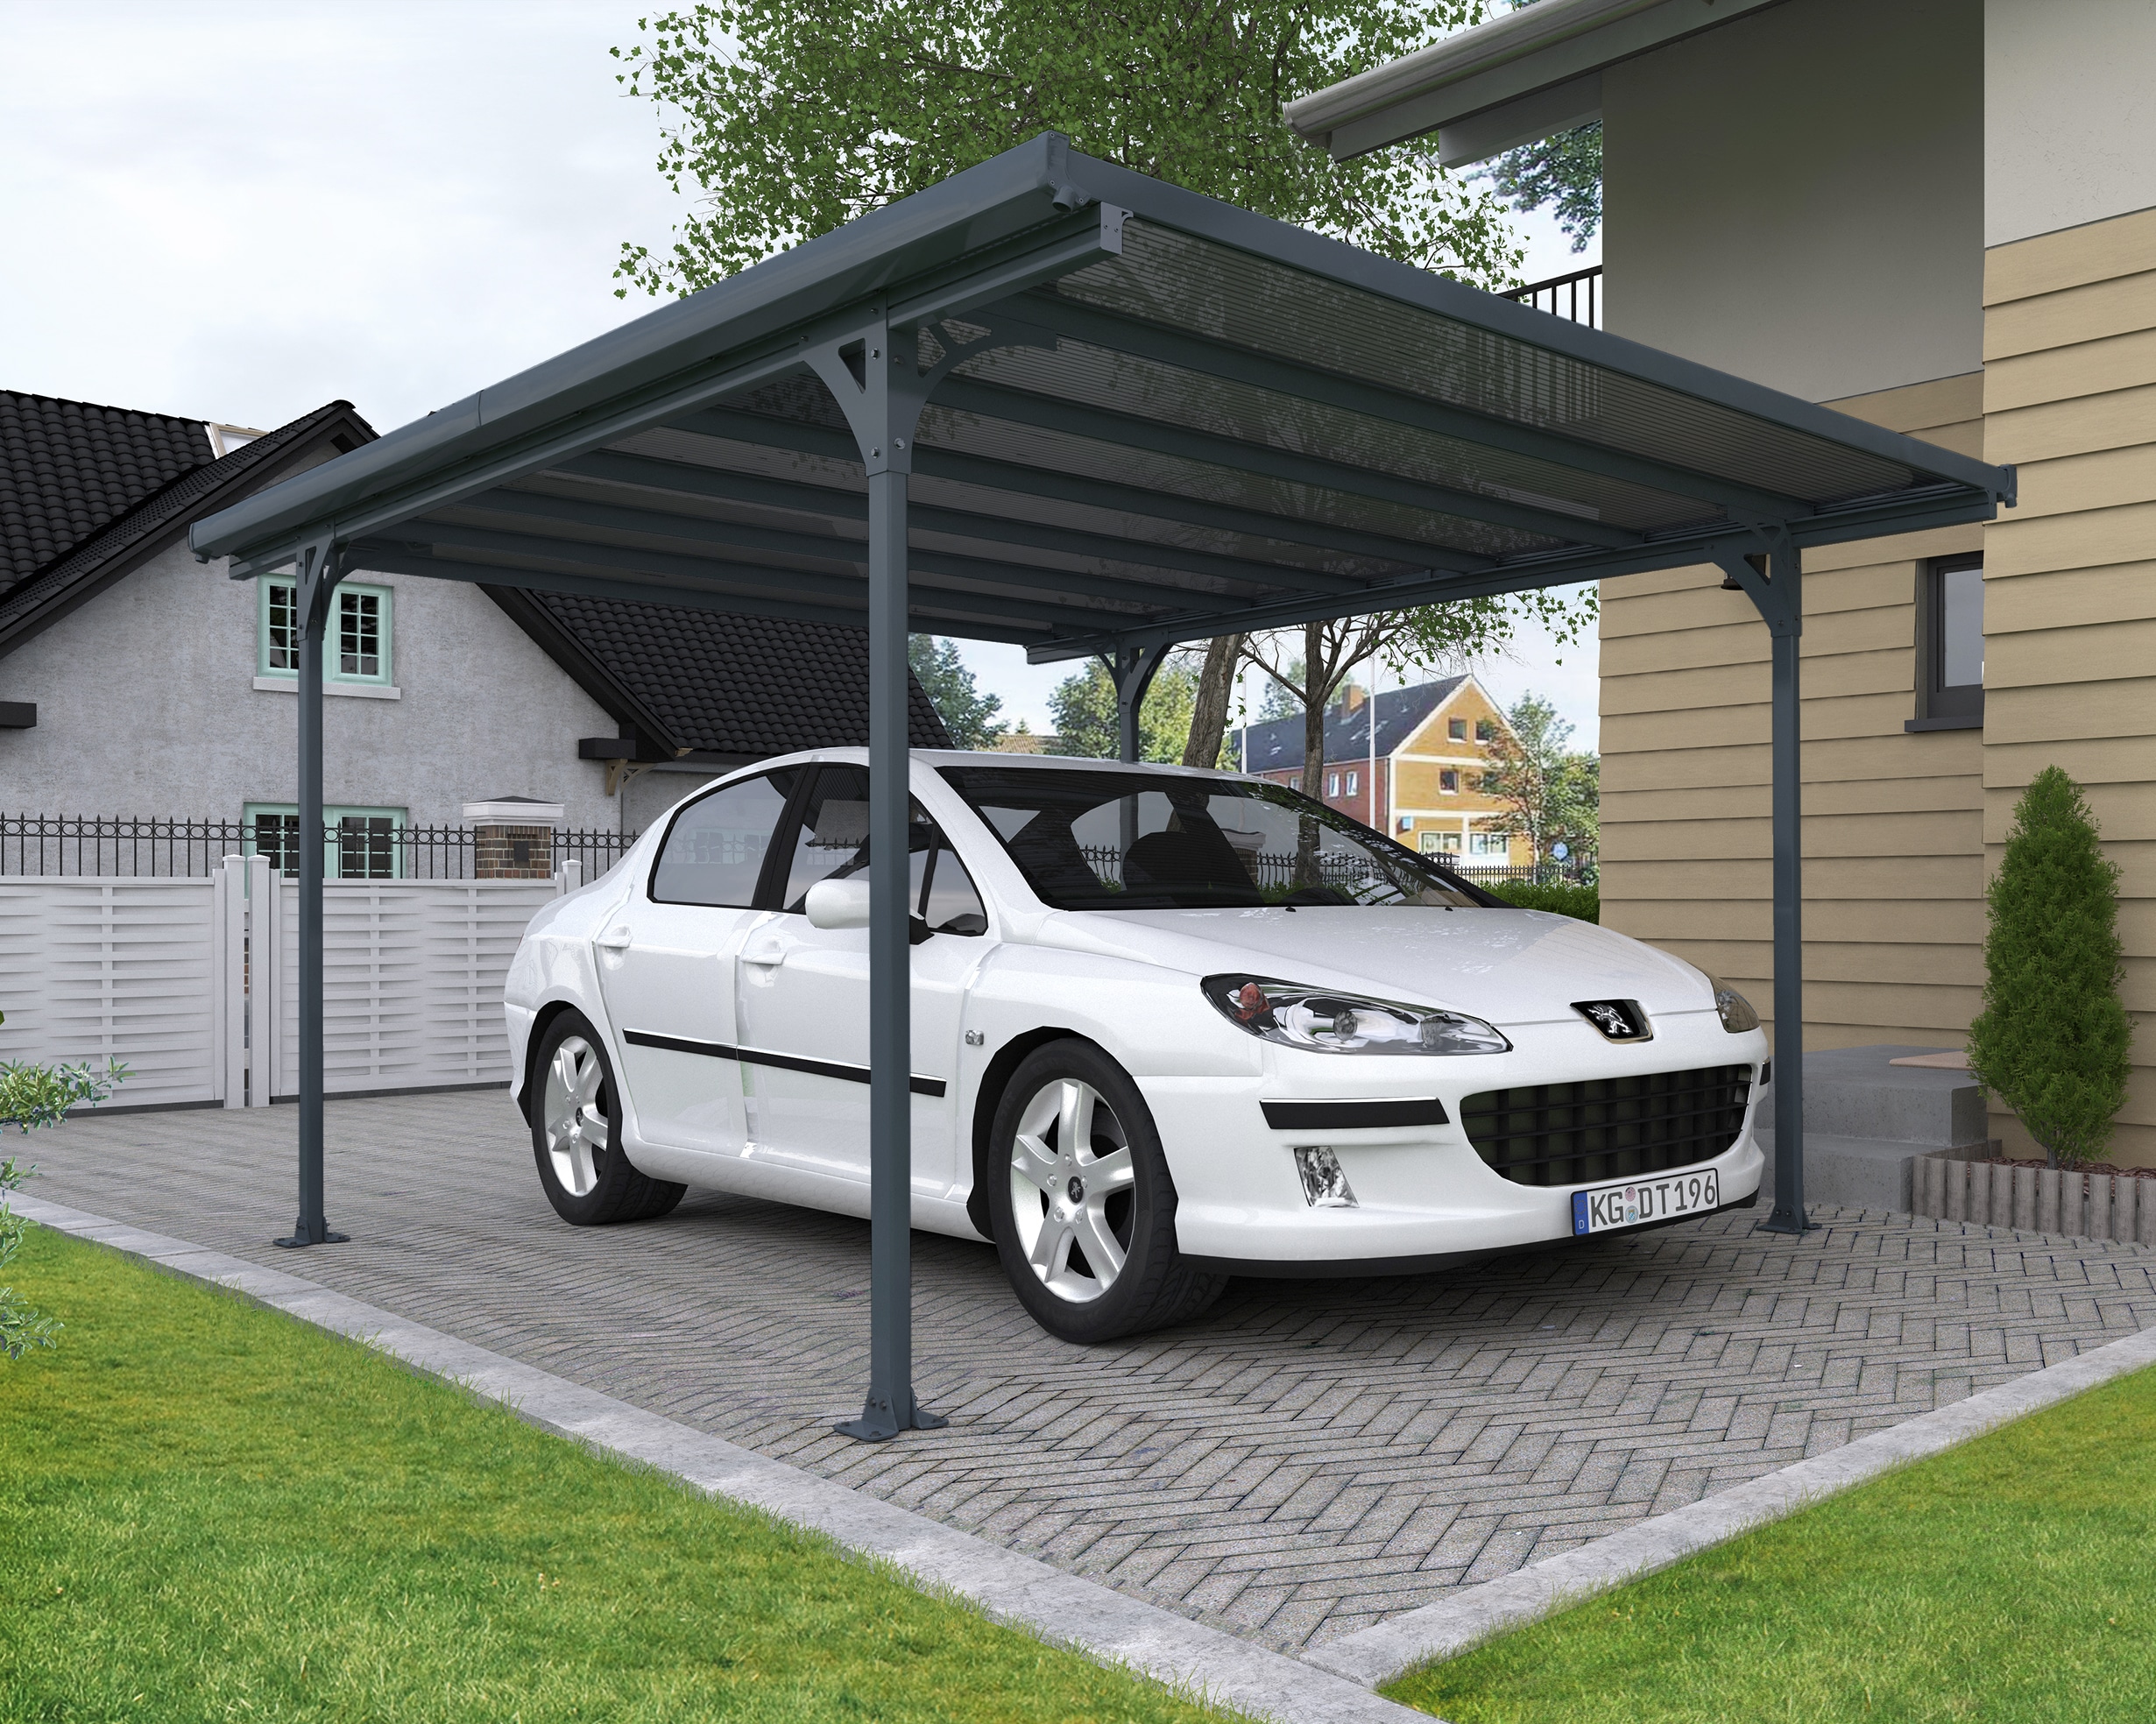 Canopia by Palram 10-ft W Panels at Carports Gray the 16-ft Frame 7.11-ft Aluminum in L department x H x and Roof Bronze Carport